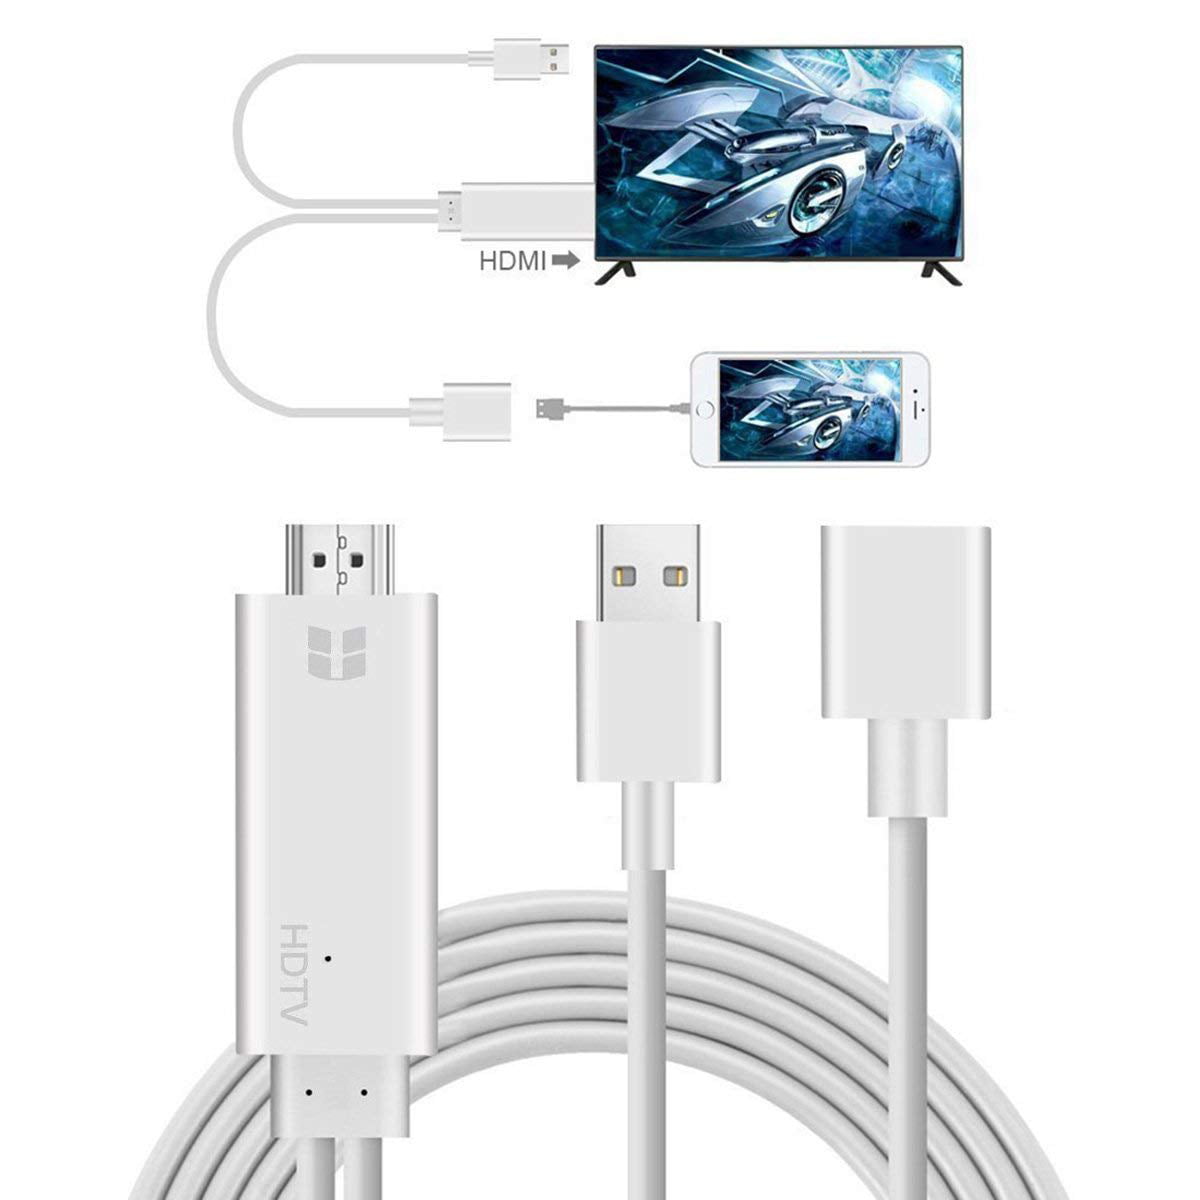 3 in 1 Smartphone to HDMI/Micro C Adapter , Lightning to HDMI 1080P Digital AV Adapter, iPhone HDMI Cables Adapter, S7 HDMI Cable to TV, for iPhone/iPad/S9/S8/Note 8 and More,I0459 -